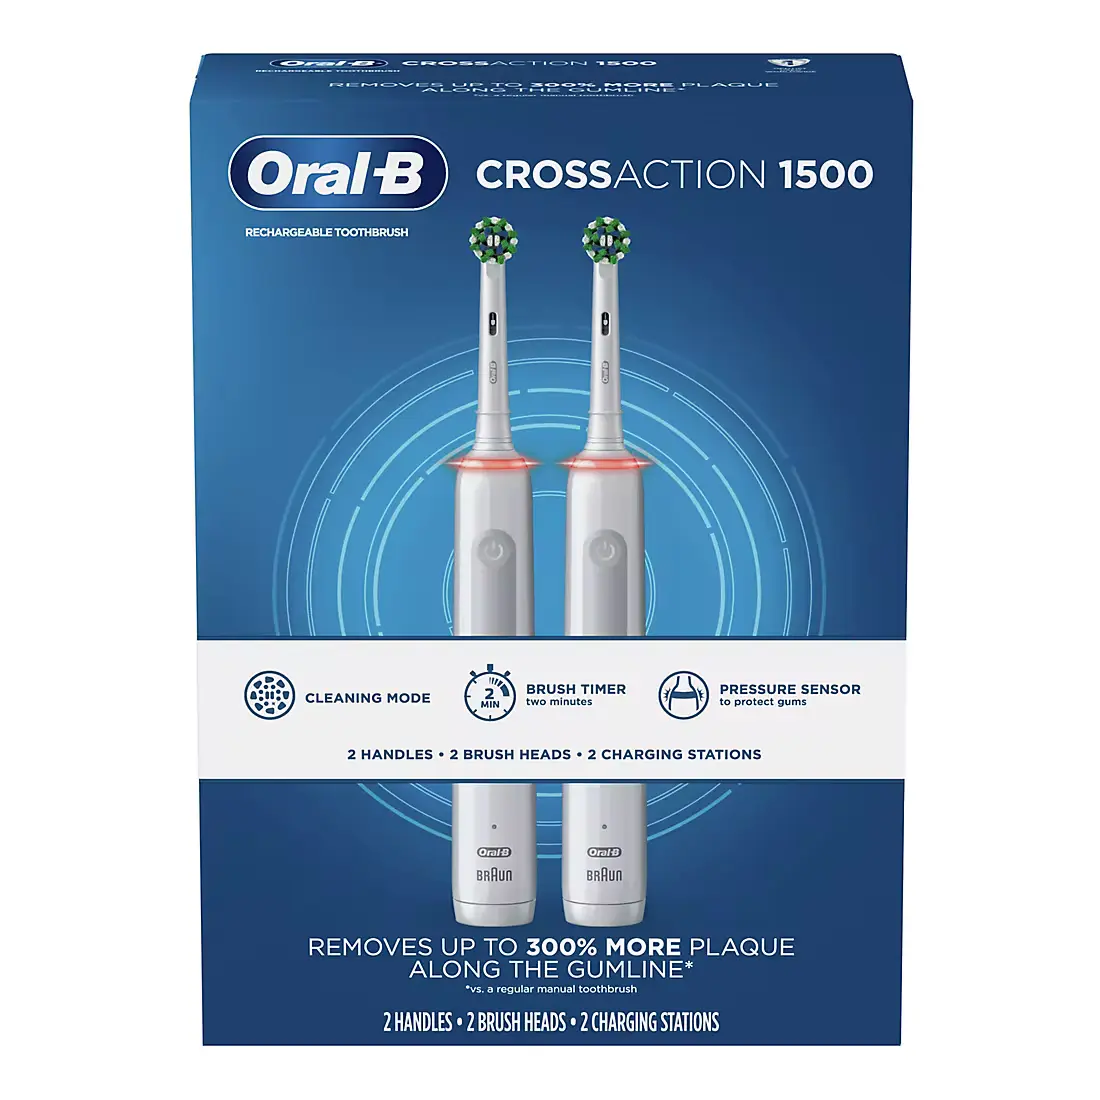 Oral-B CrossAction 1500 Rechargeable Electric Toothbrush